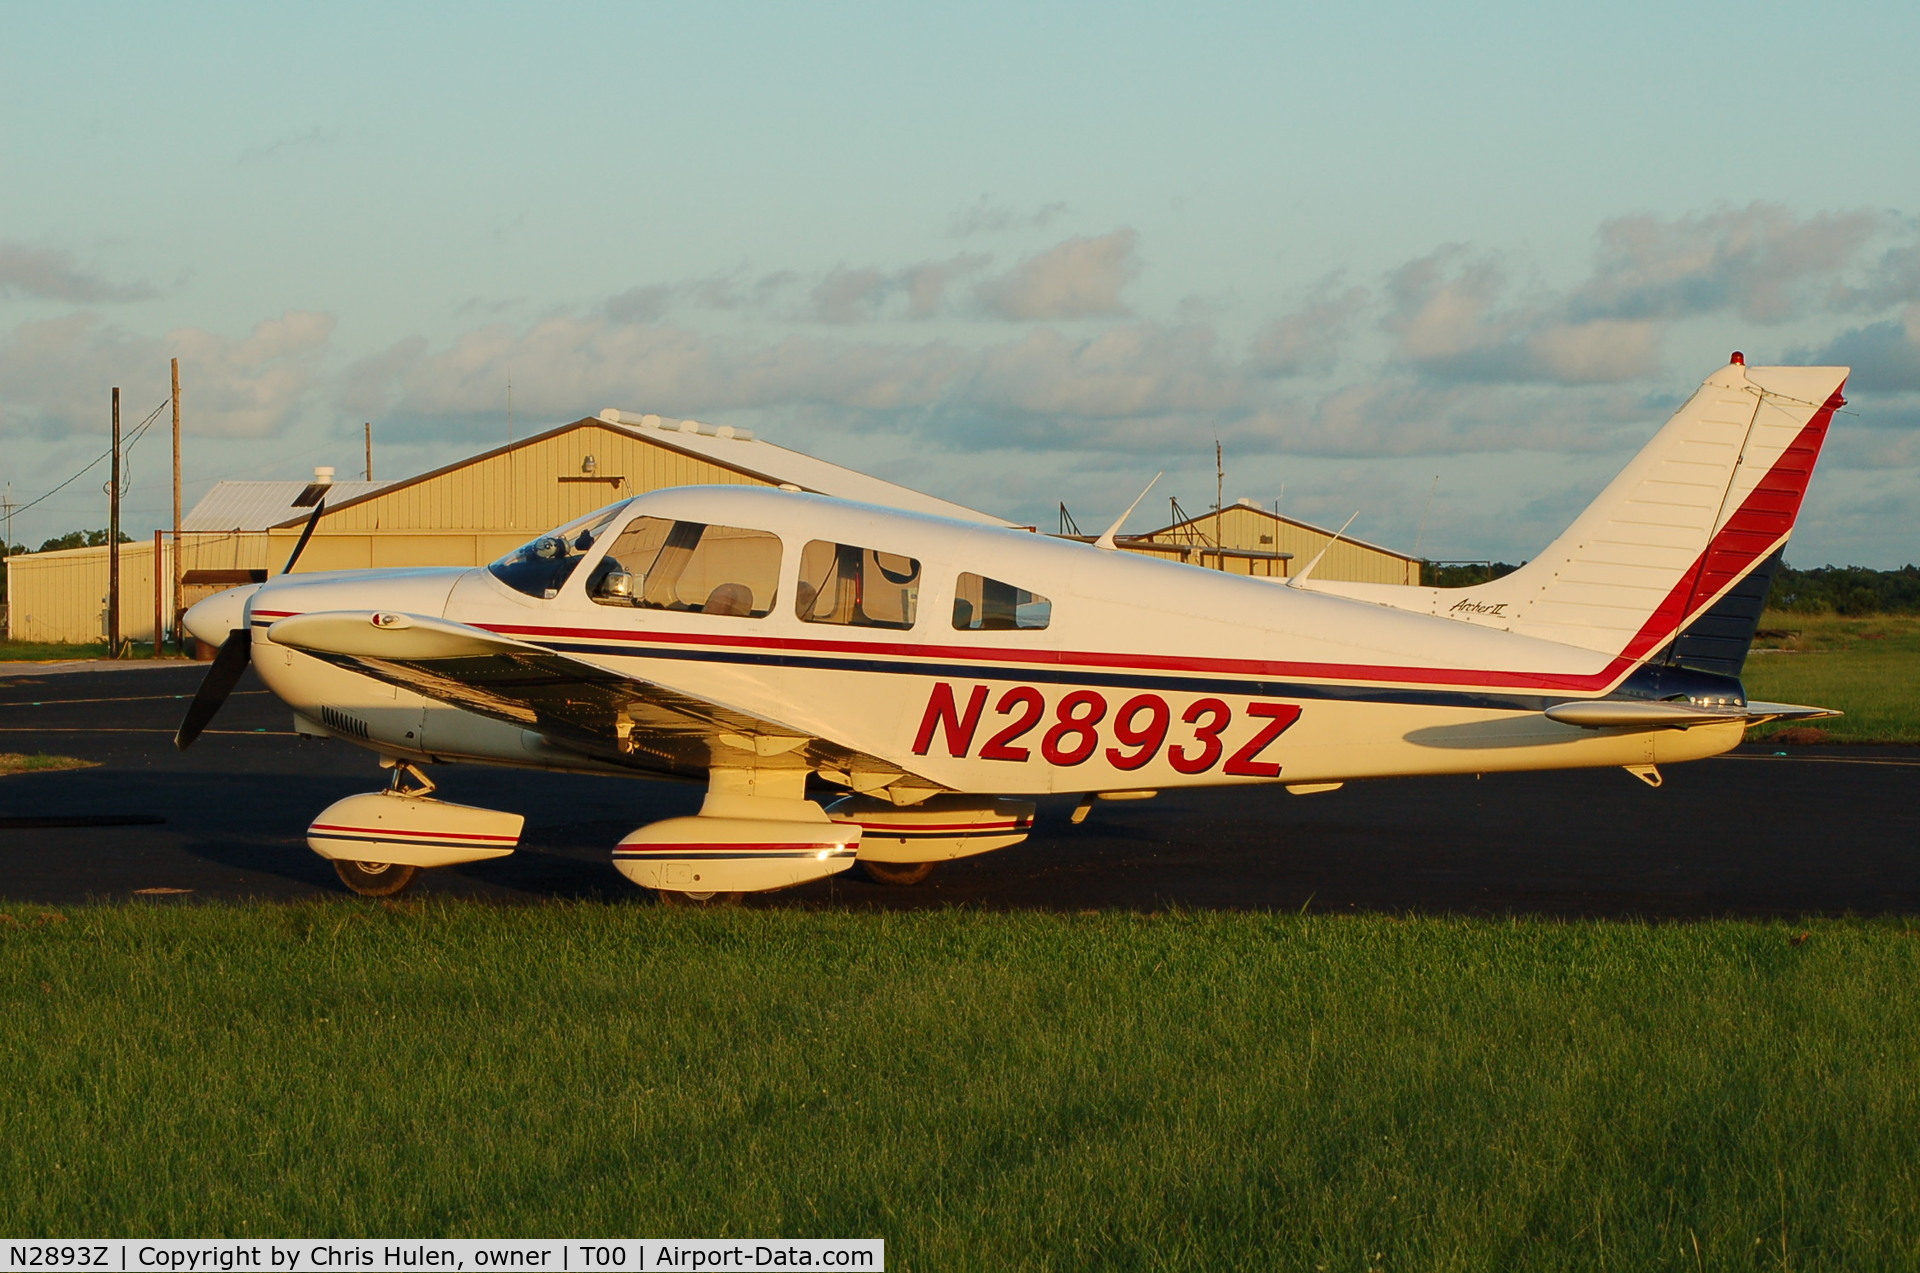 N2893Z, Piper PA-28-181 C/N 28-7990533, Shot at dusk just after landing on Anahuac's huge grass runway.  Ironically, another aircraft with this same N-number crashed at Anahuac decades ago.